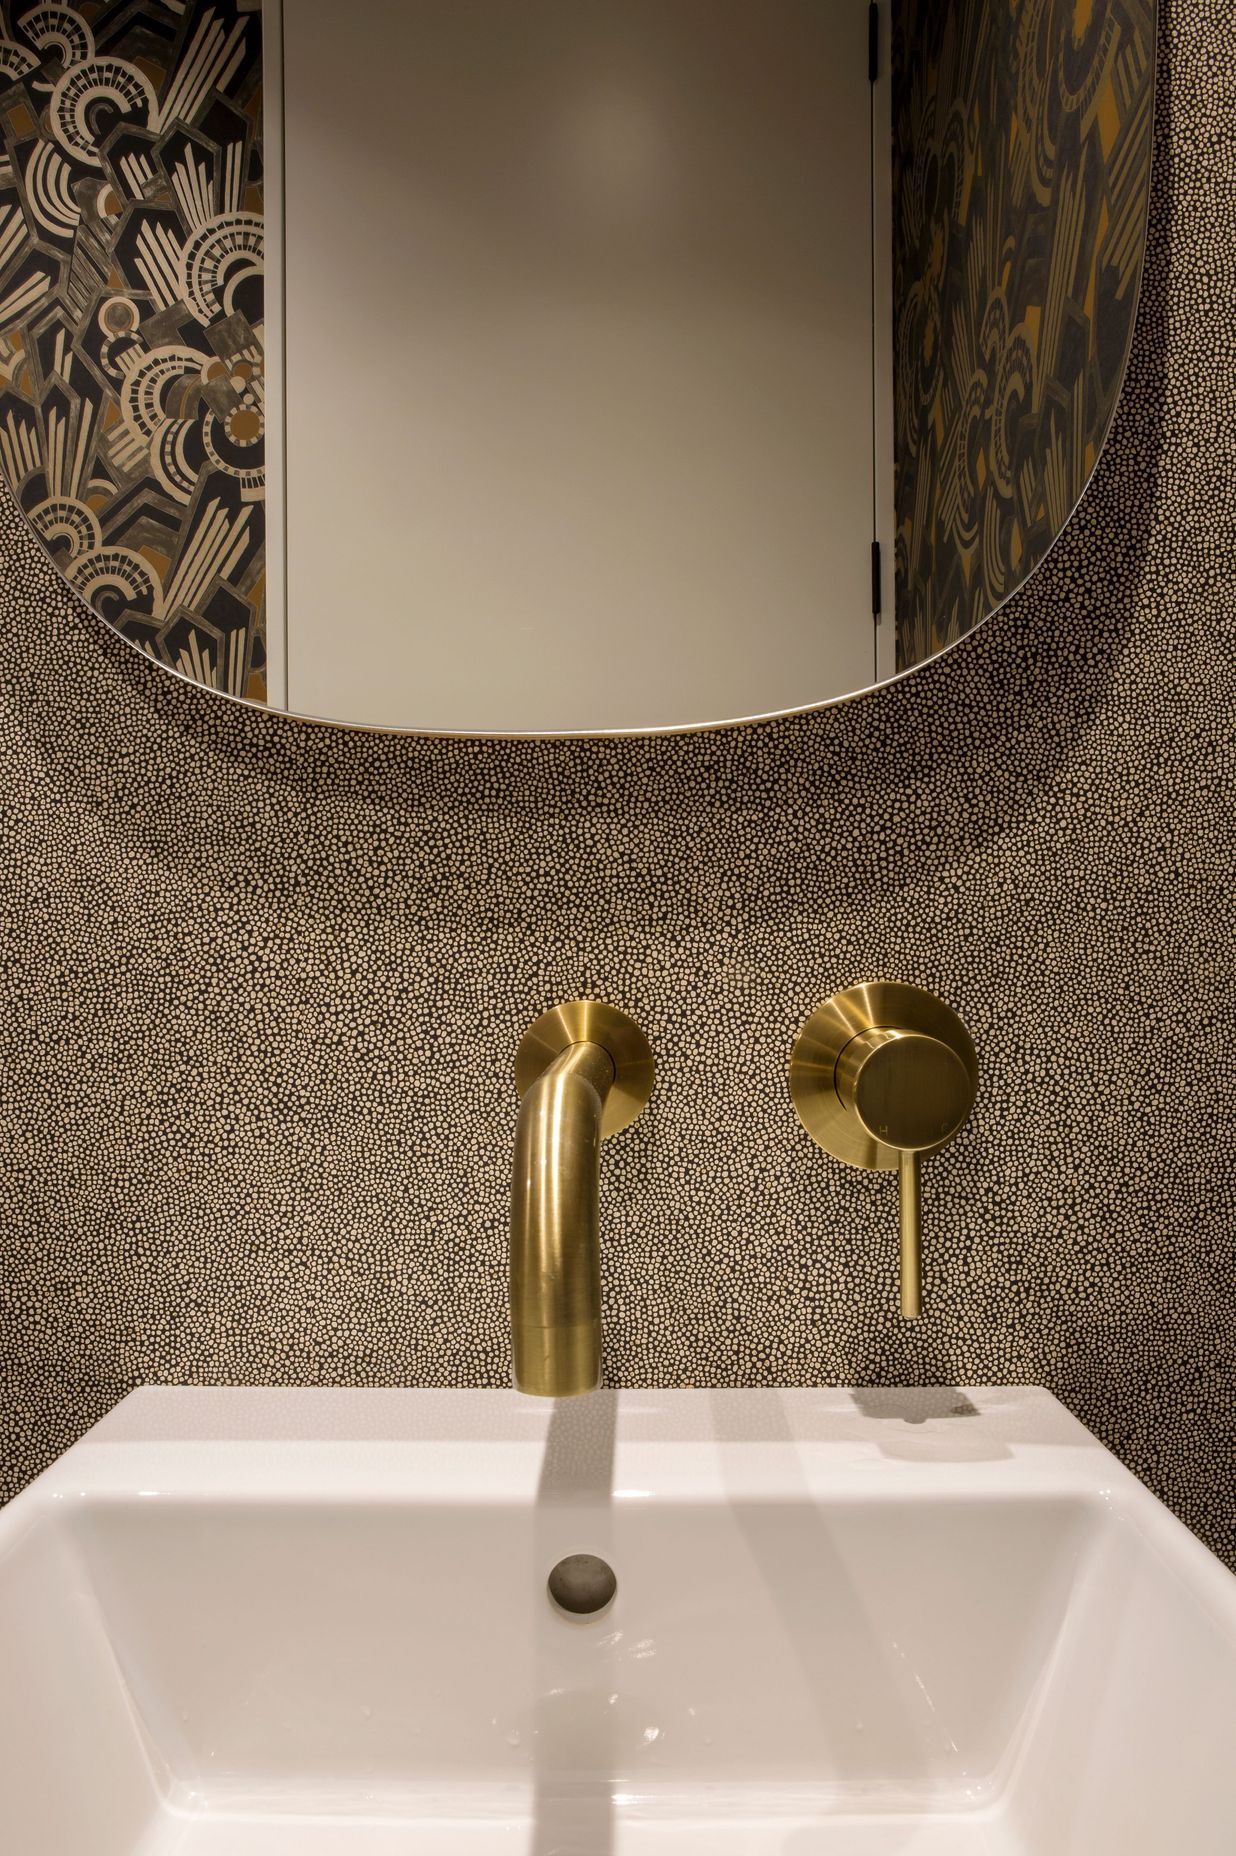 Brass tapware and retro wall coverings add personality to the powder room.